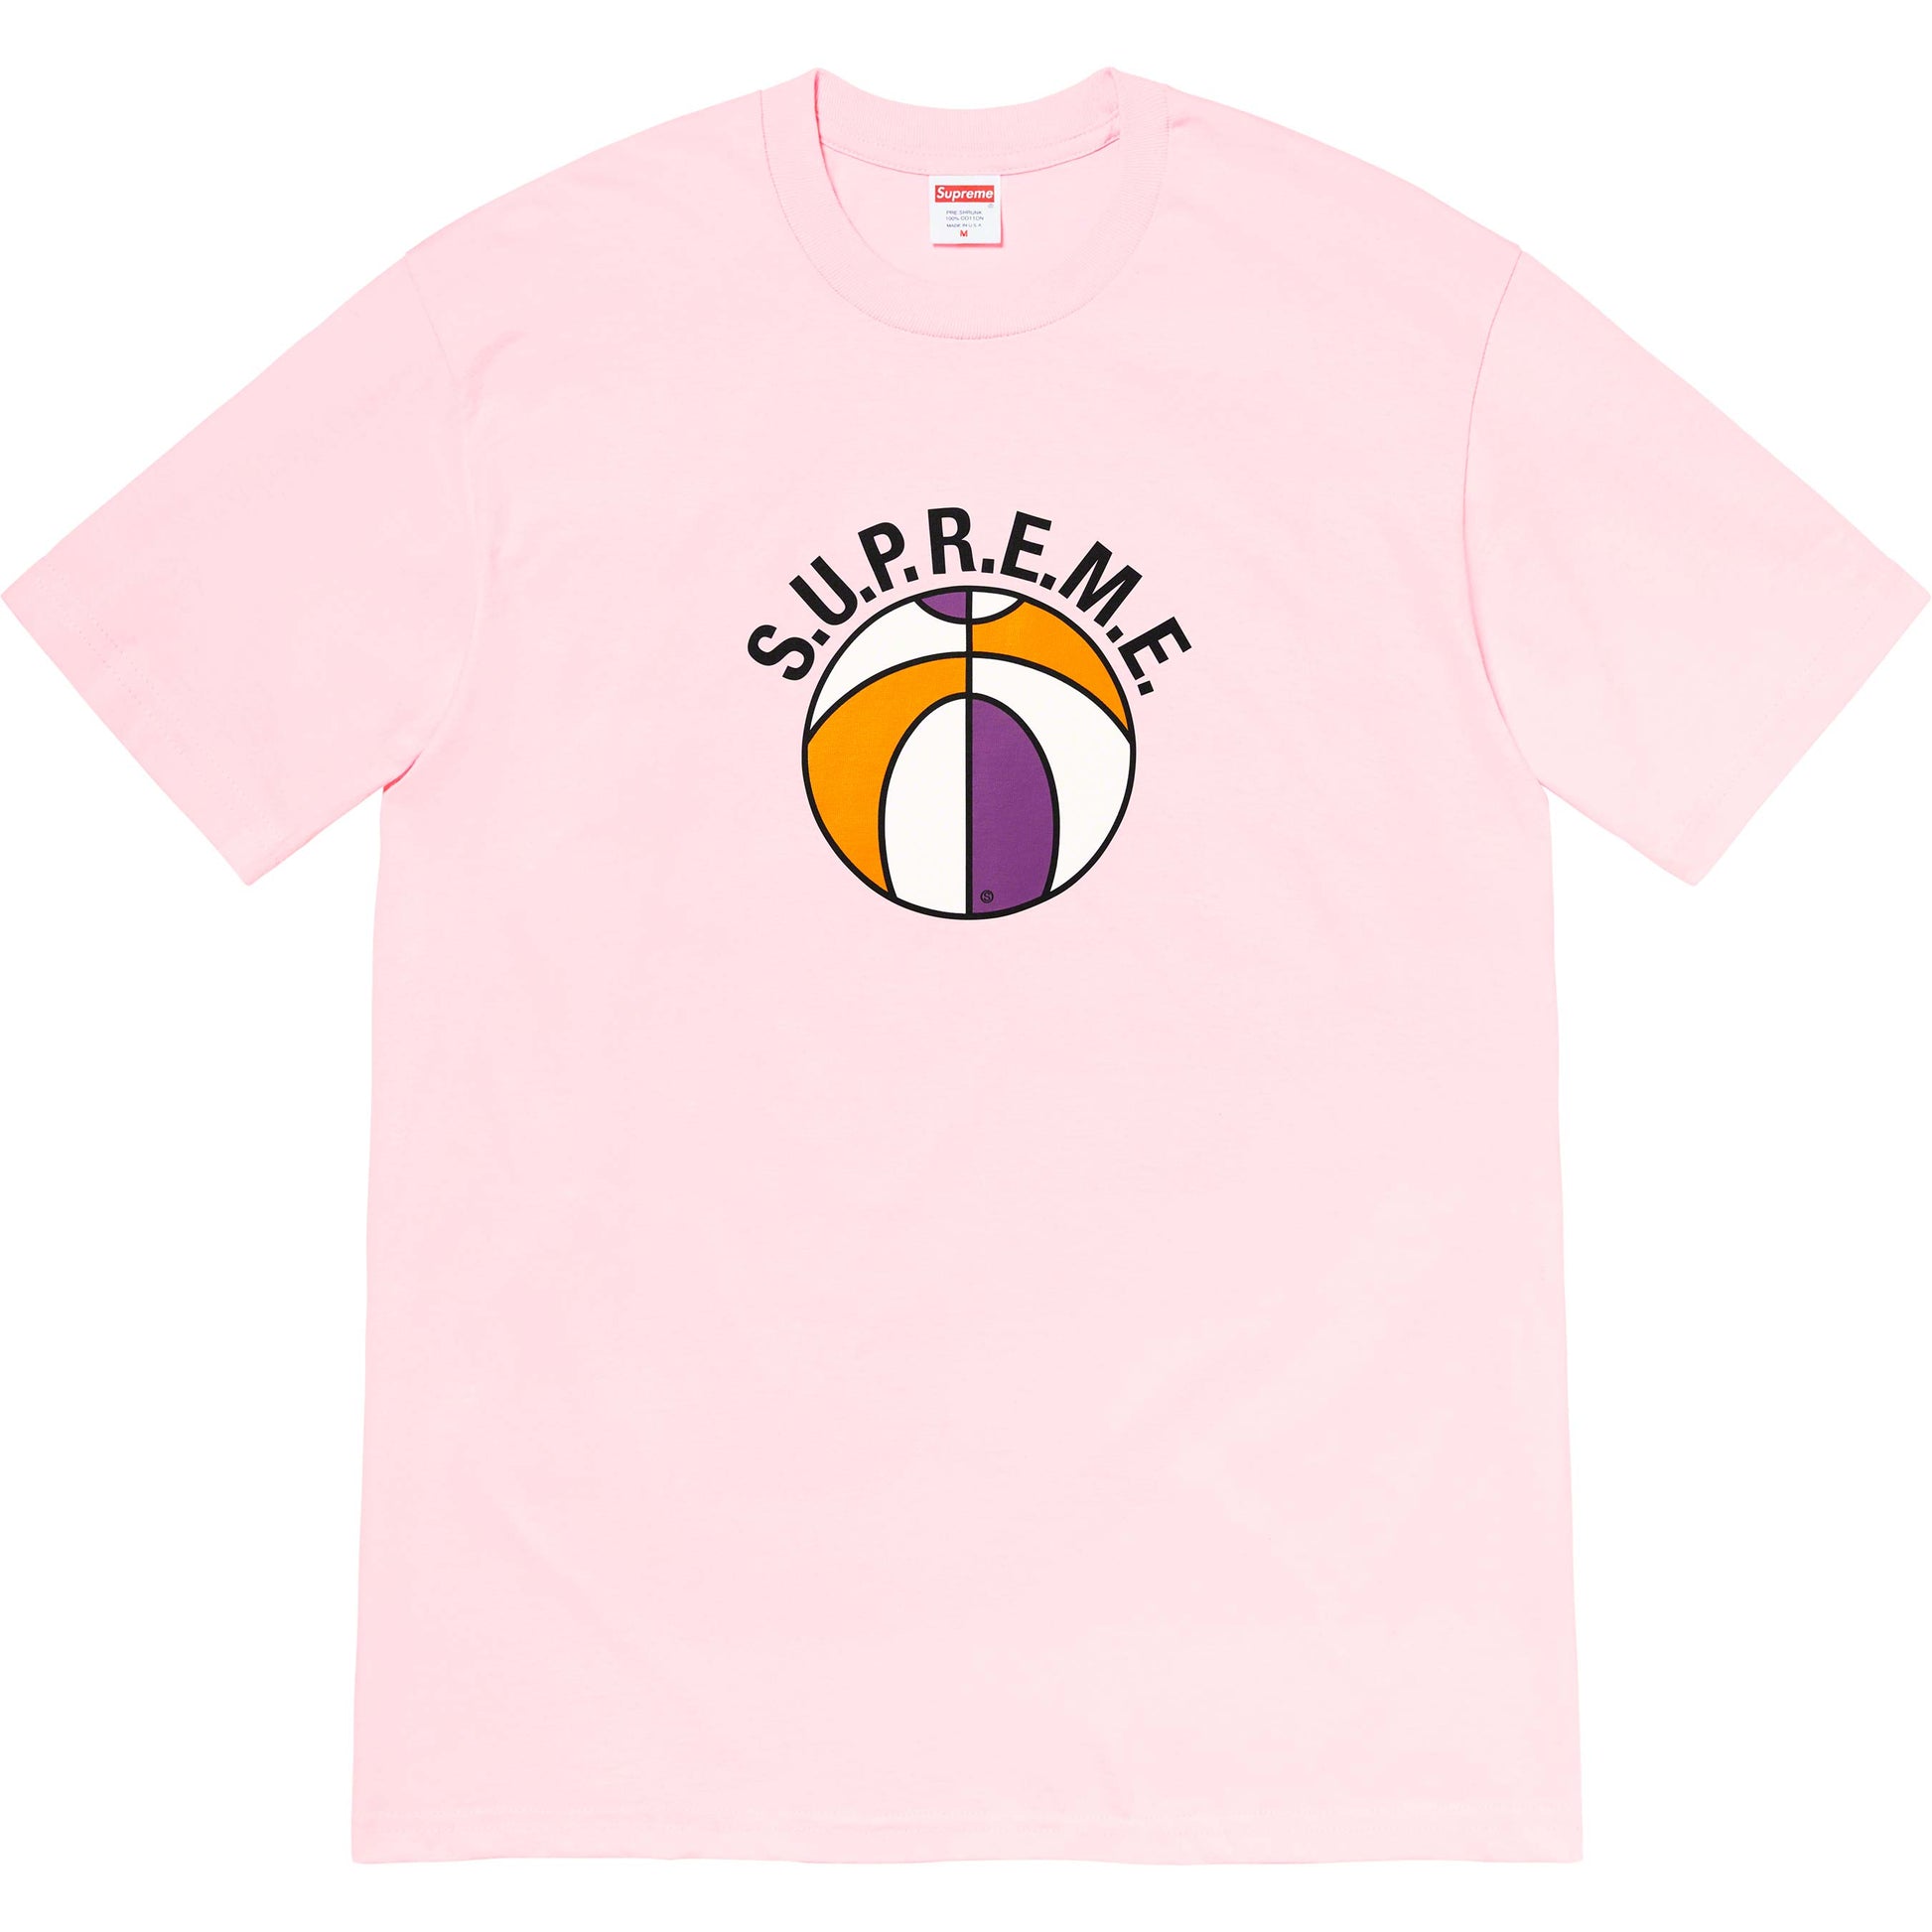 Supreme League Tee Light Pink from Supreme